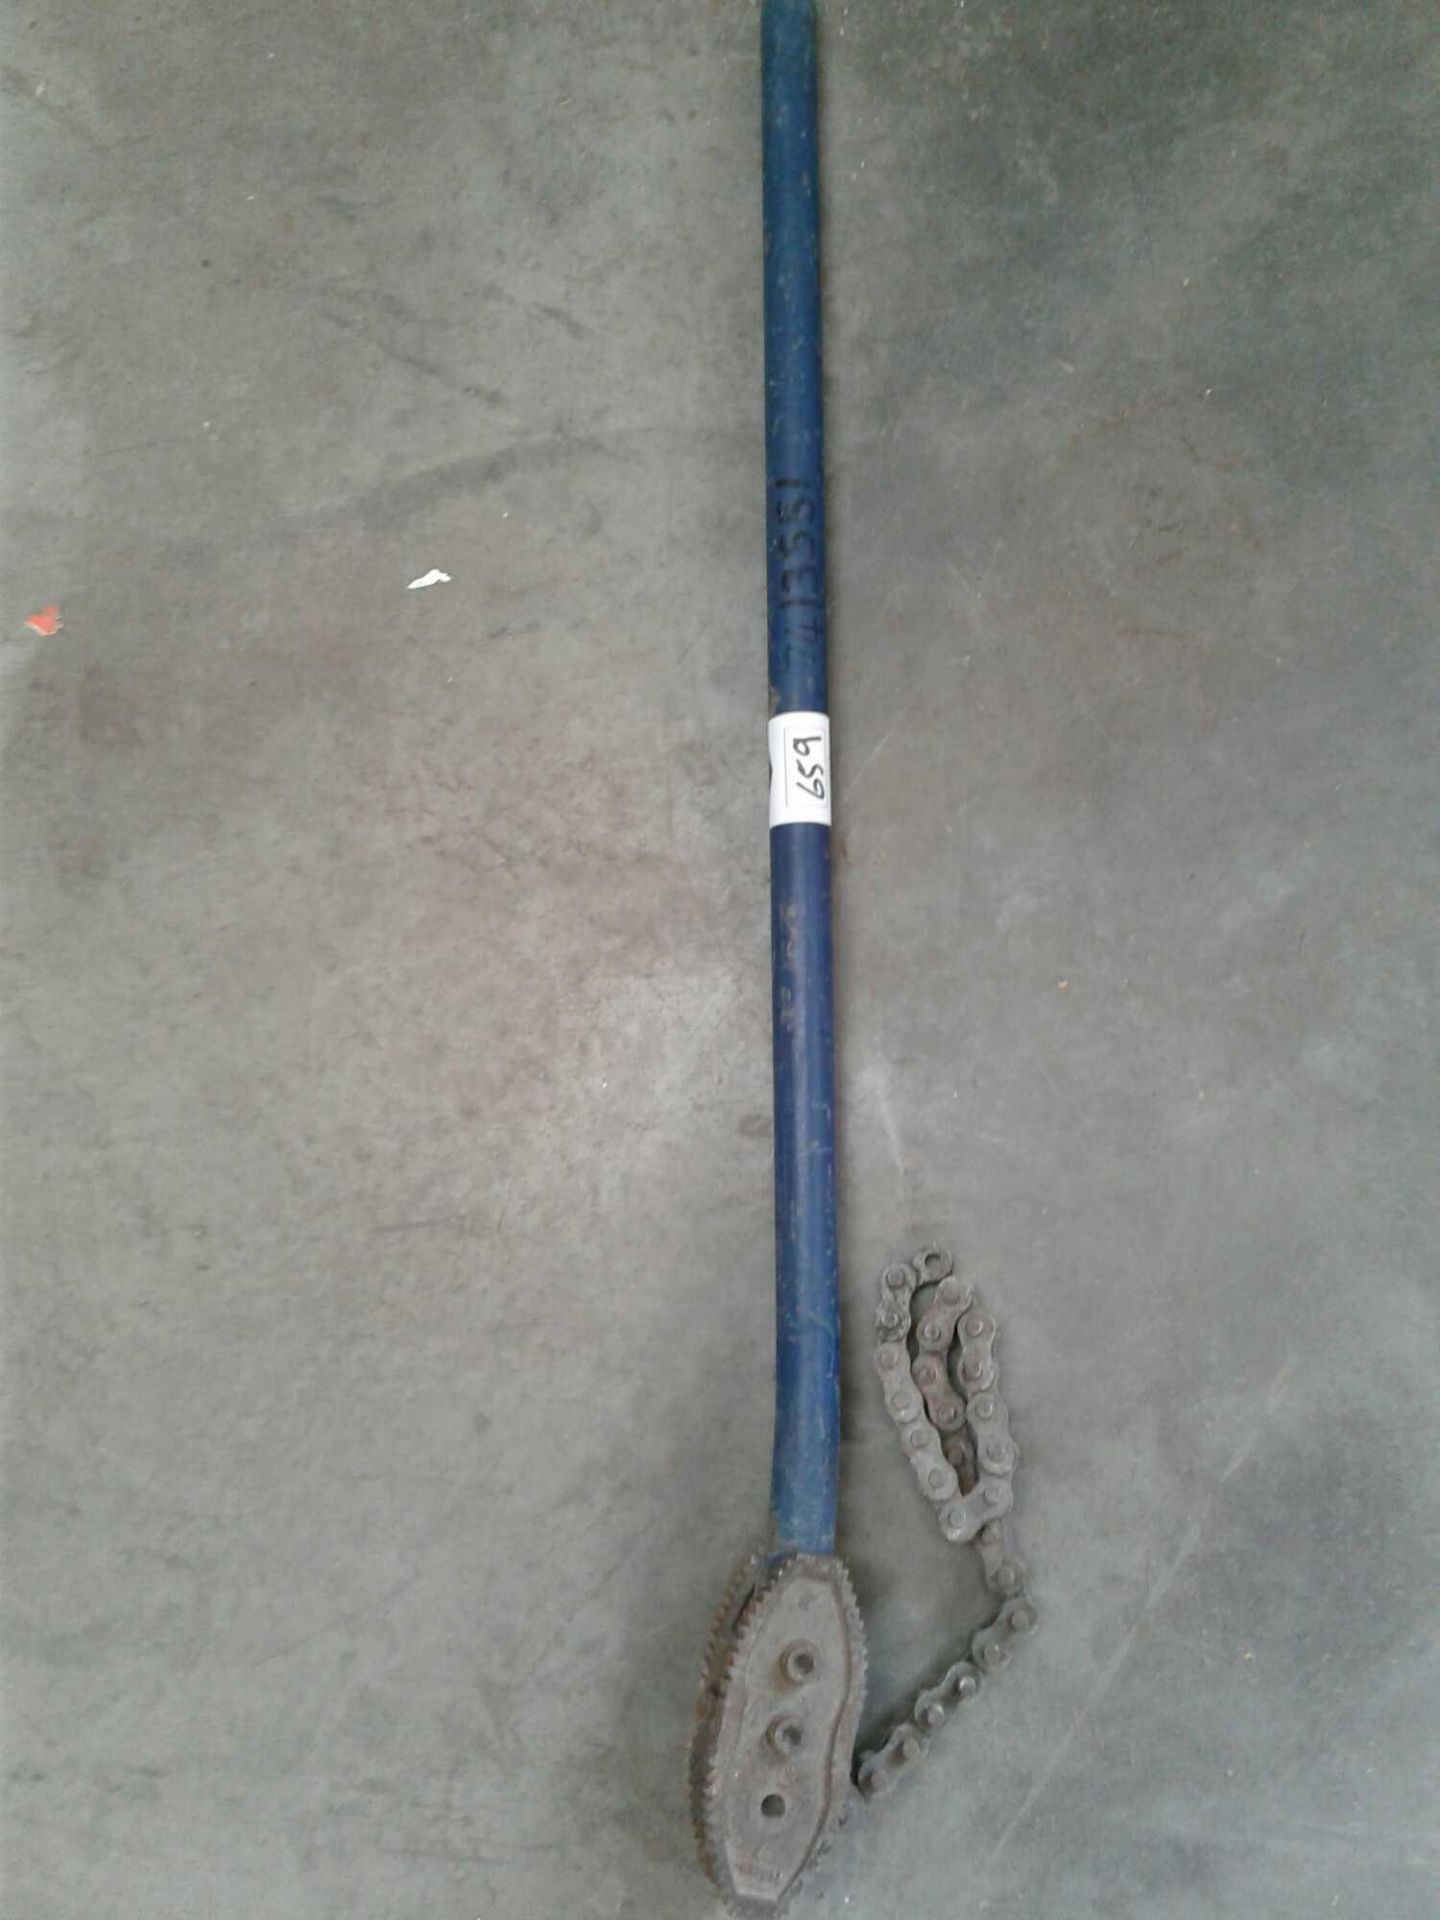 Pipe chain wrench